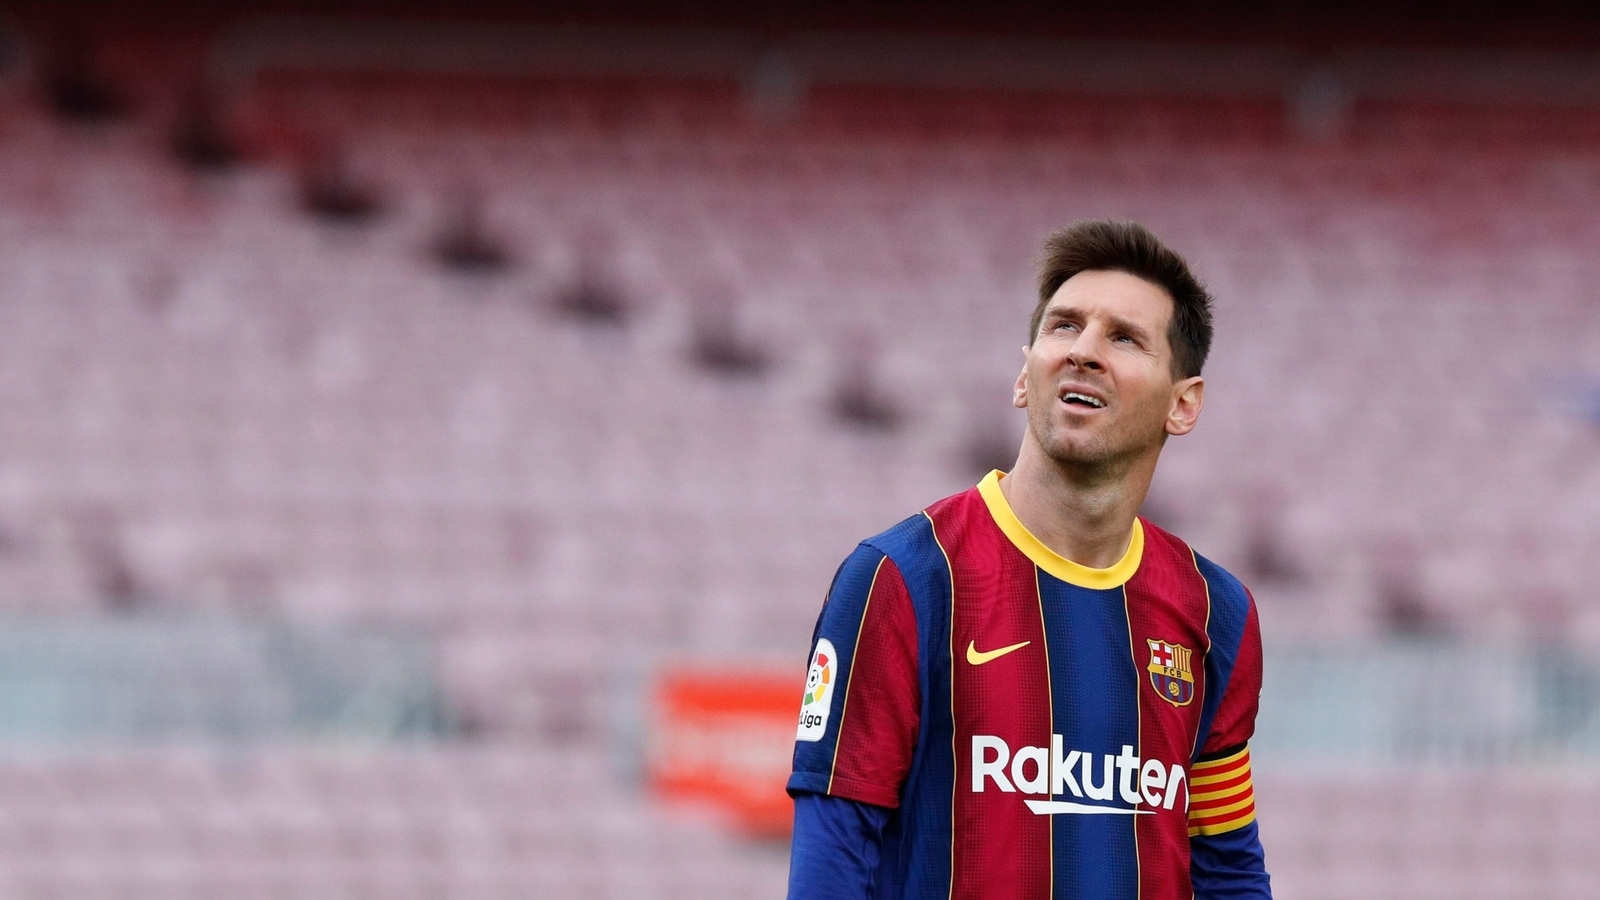 Has Messi played his last game for Barcelona at Camp Nou? Football